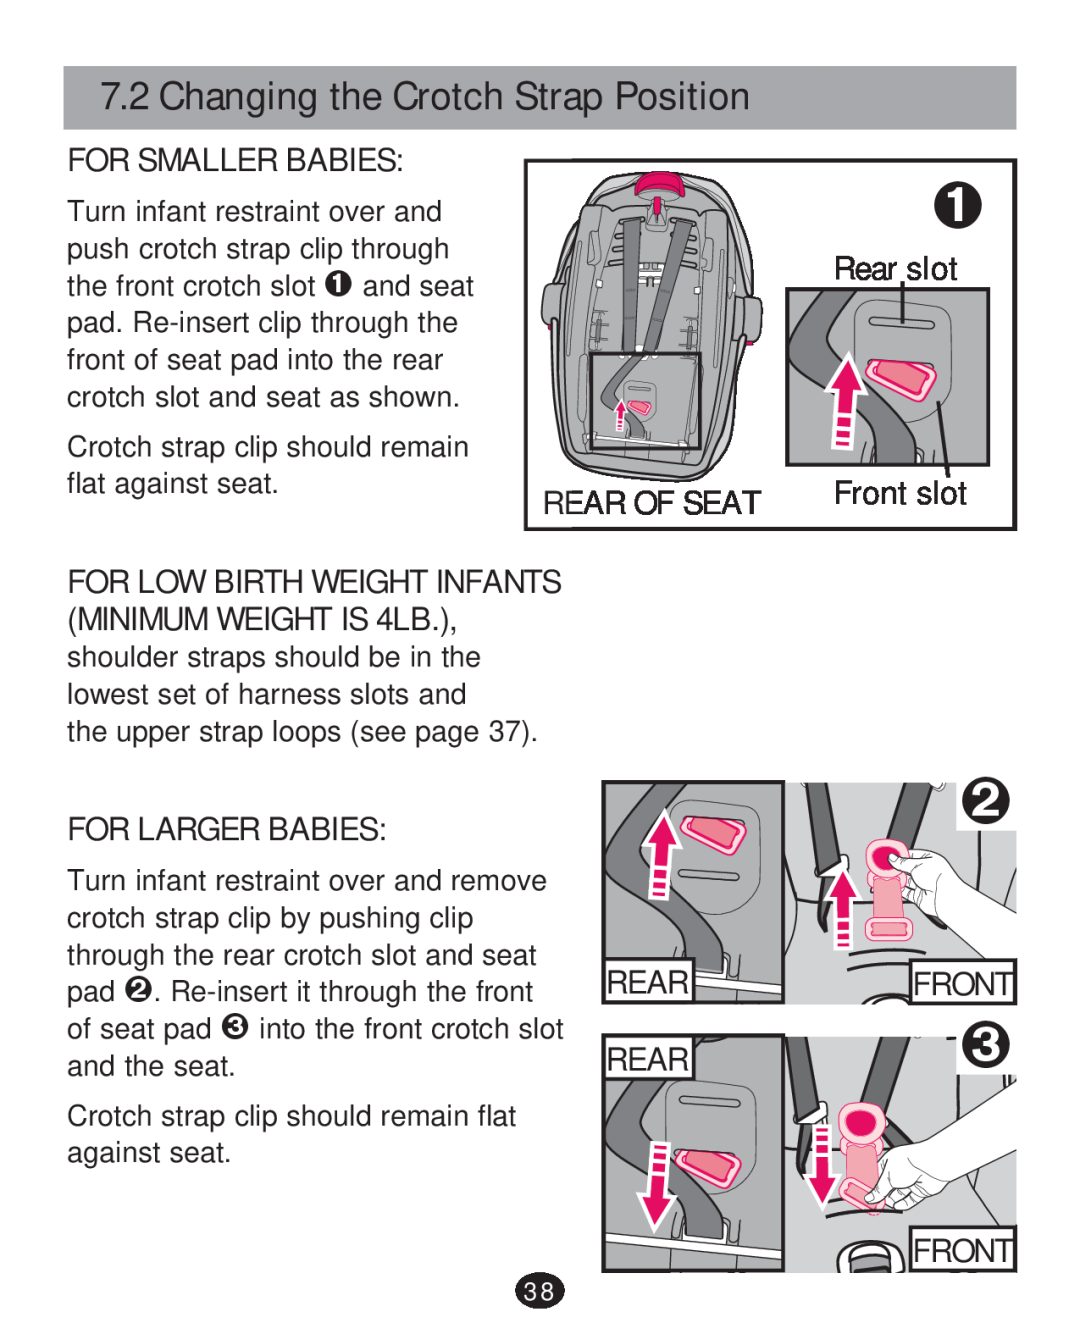 Graco 30 Changing the Crotch Strap Position, For Smaller Babies, Rear slot, Rear Of Seat, Front slot, For Larger Babies 